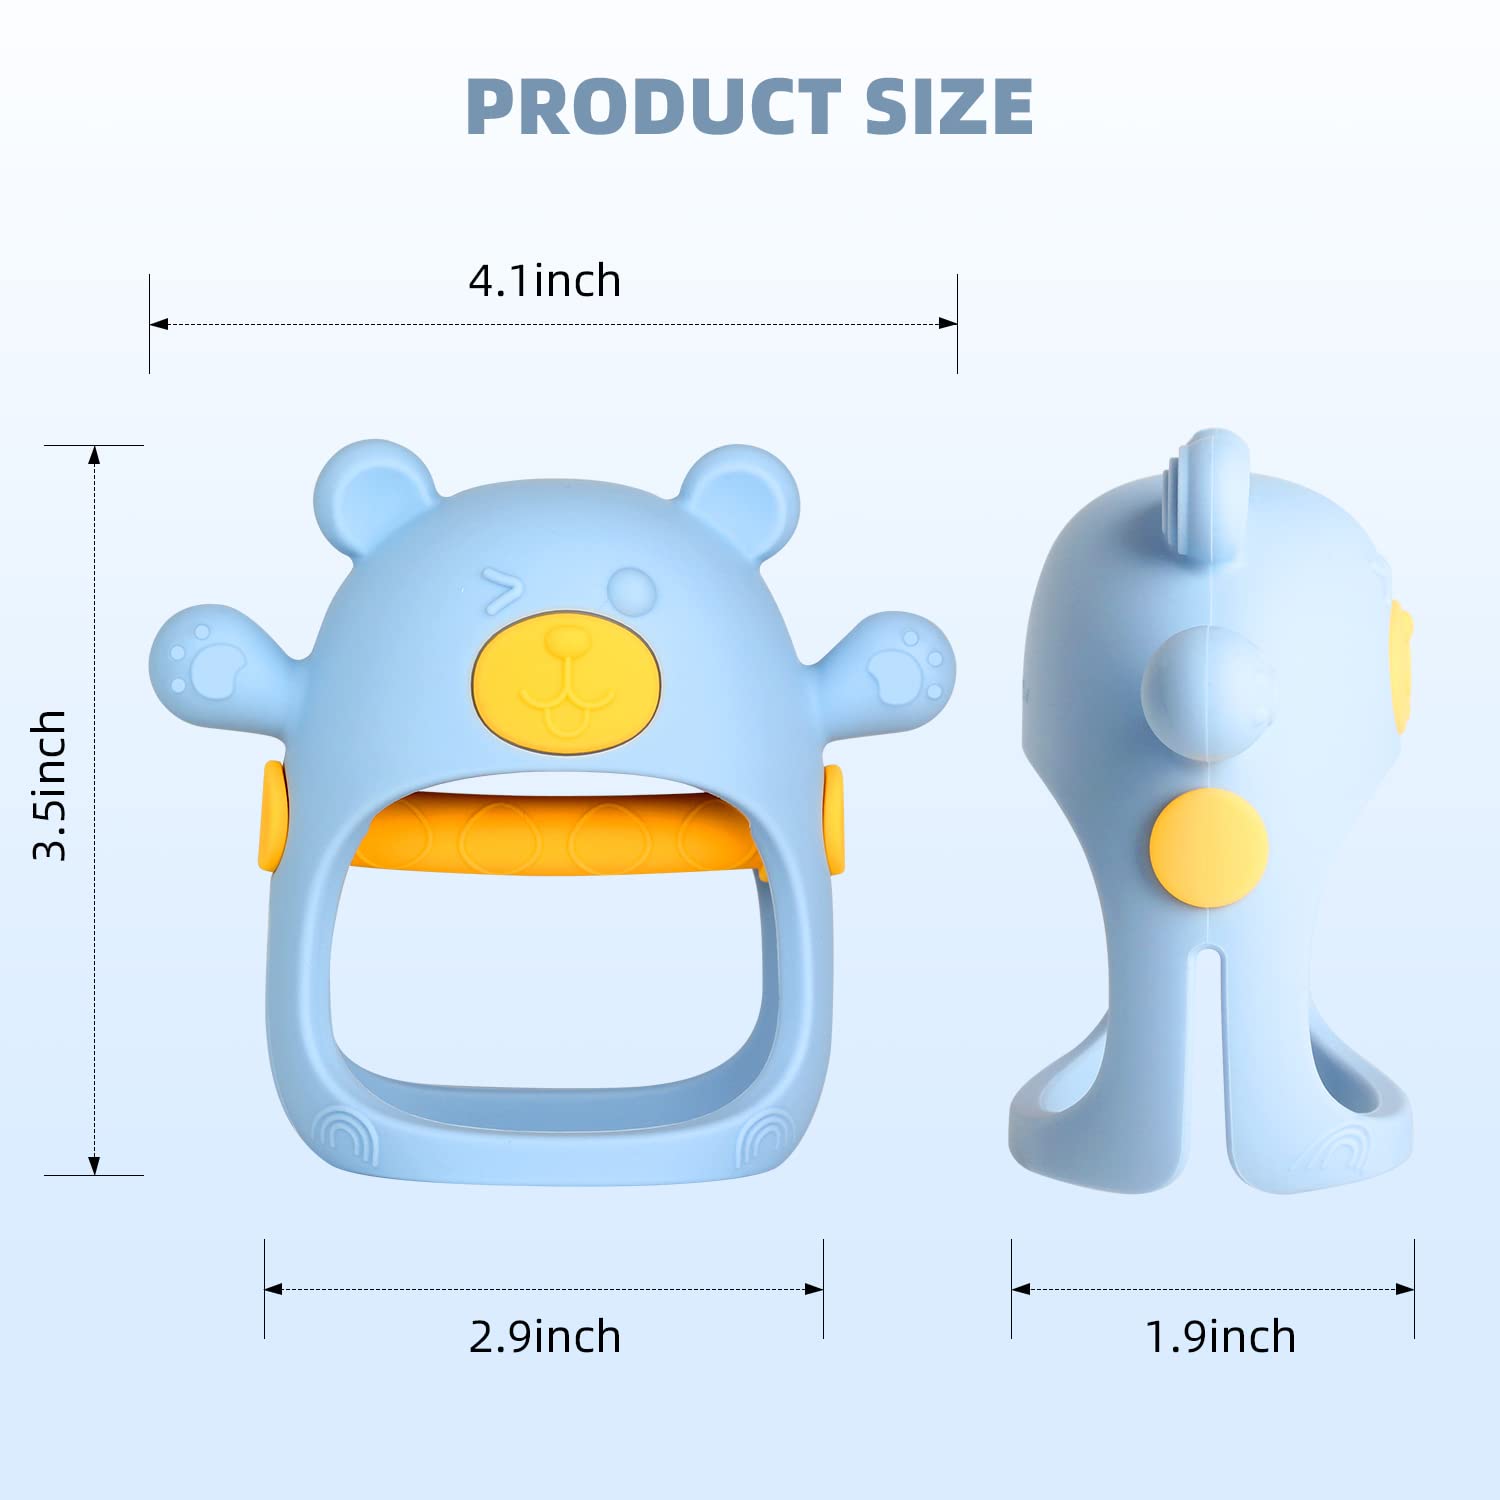 Fu Store Bear Anti-Dropping Silicone Baby Teething Toy Infants Baby Chew Toys for Sucking Needs, Hand Pacifier for Breast Feeding Babies for New Born (1 Blue & 1 Finger Toothbrush)